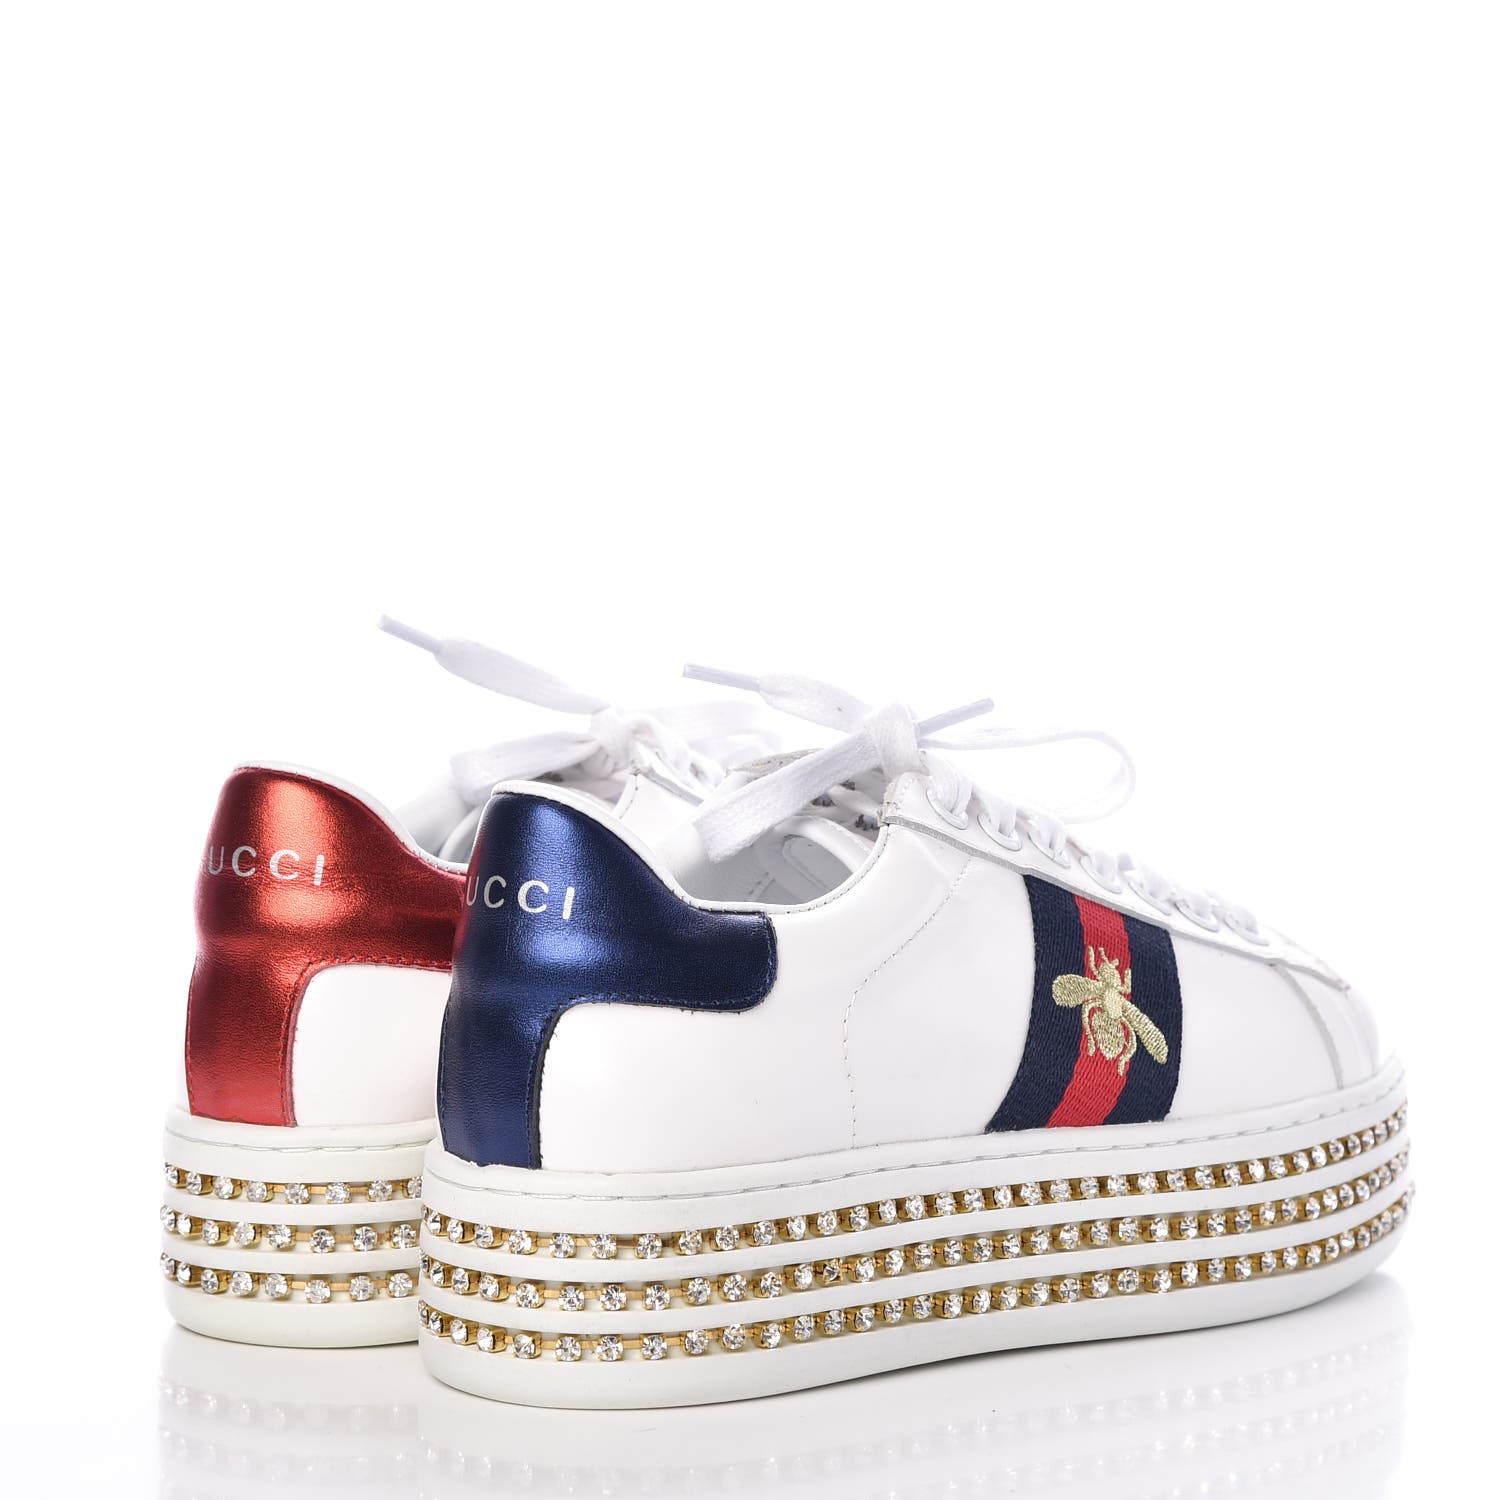 GUCCI Ayers Embroidered Crystal Ace Bee Star Platform Sneakers 37 White 306749